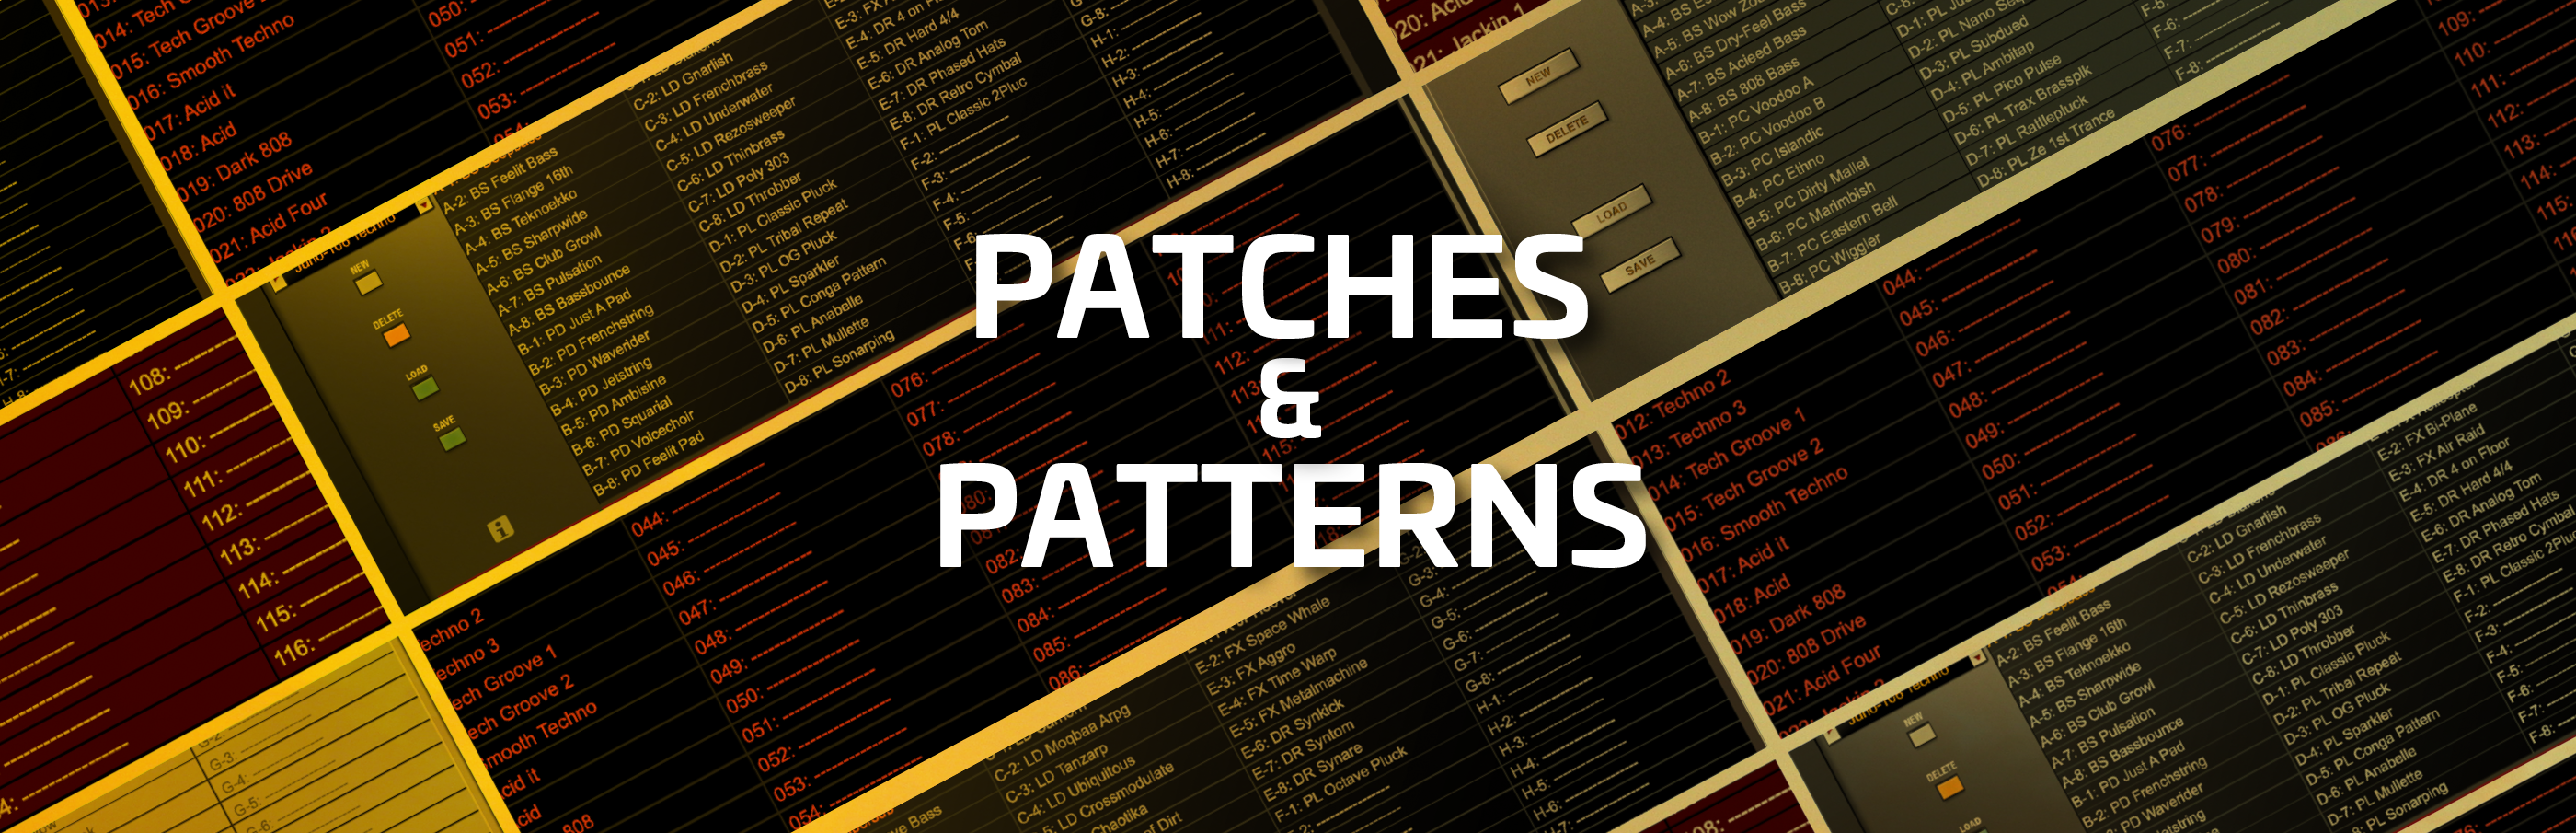 Patches & Patterns